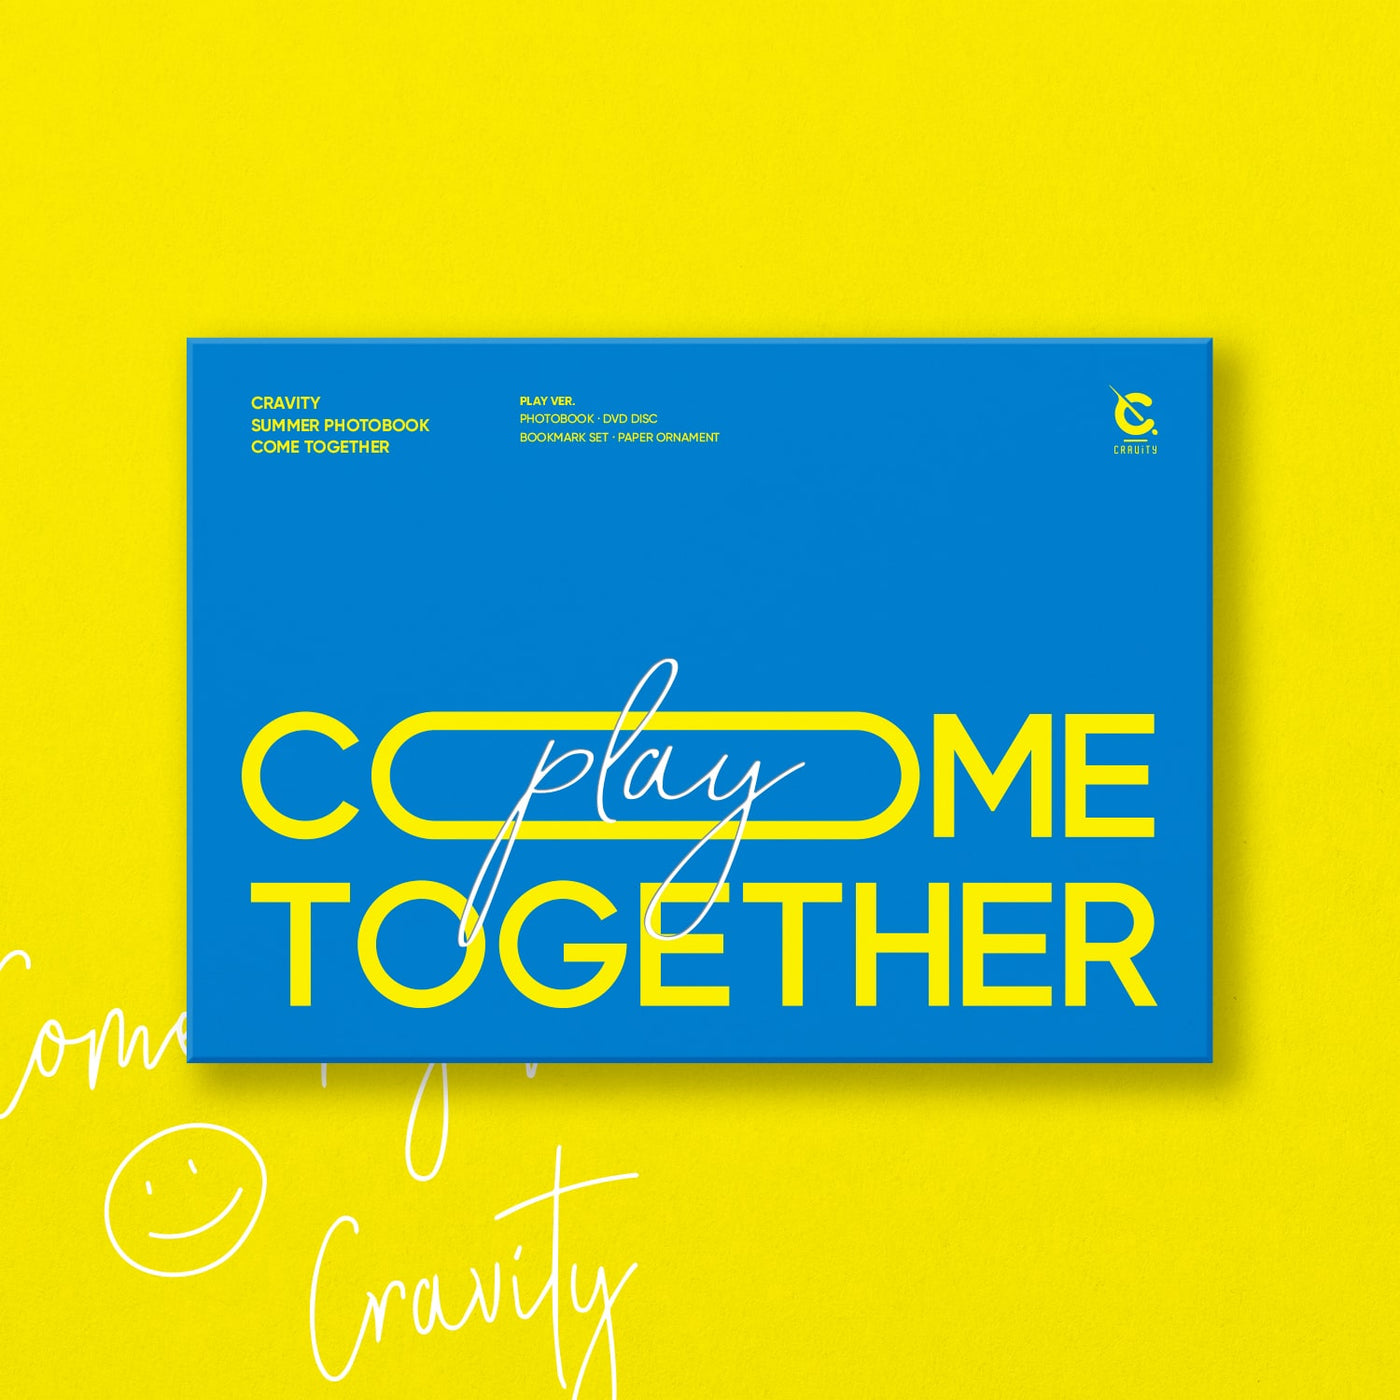 CRAVITY CRAVITY SUMMER PHOTO BOOK - [COME TOGETHER] PLAY Version 🇰🇷